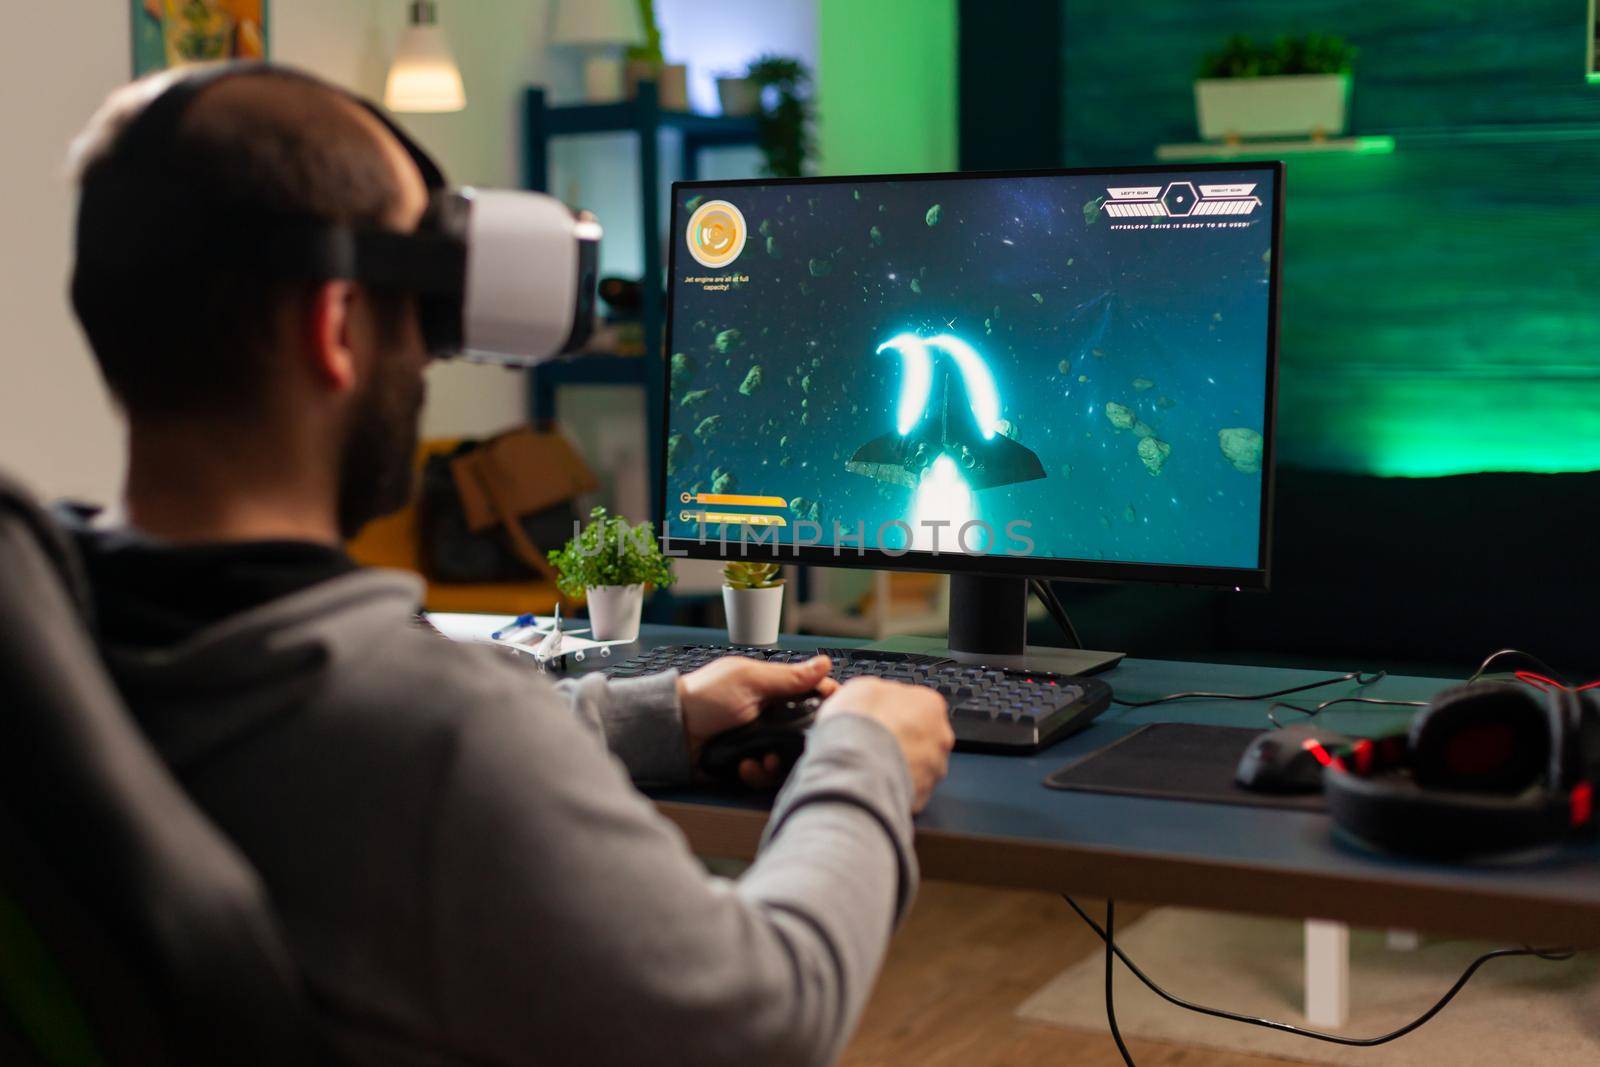 Caucasian gamer playing space shooter championship while wearing virtual reality headset. Defeated gamer using professional console for online tournament late at night in gaming room